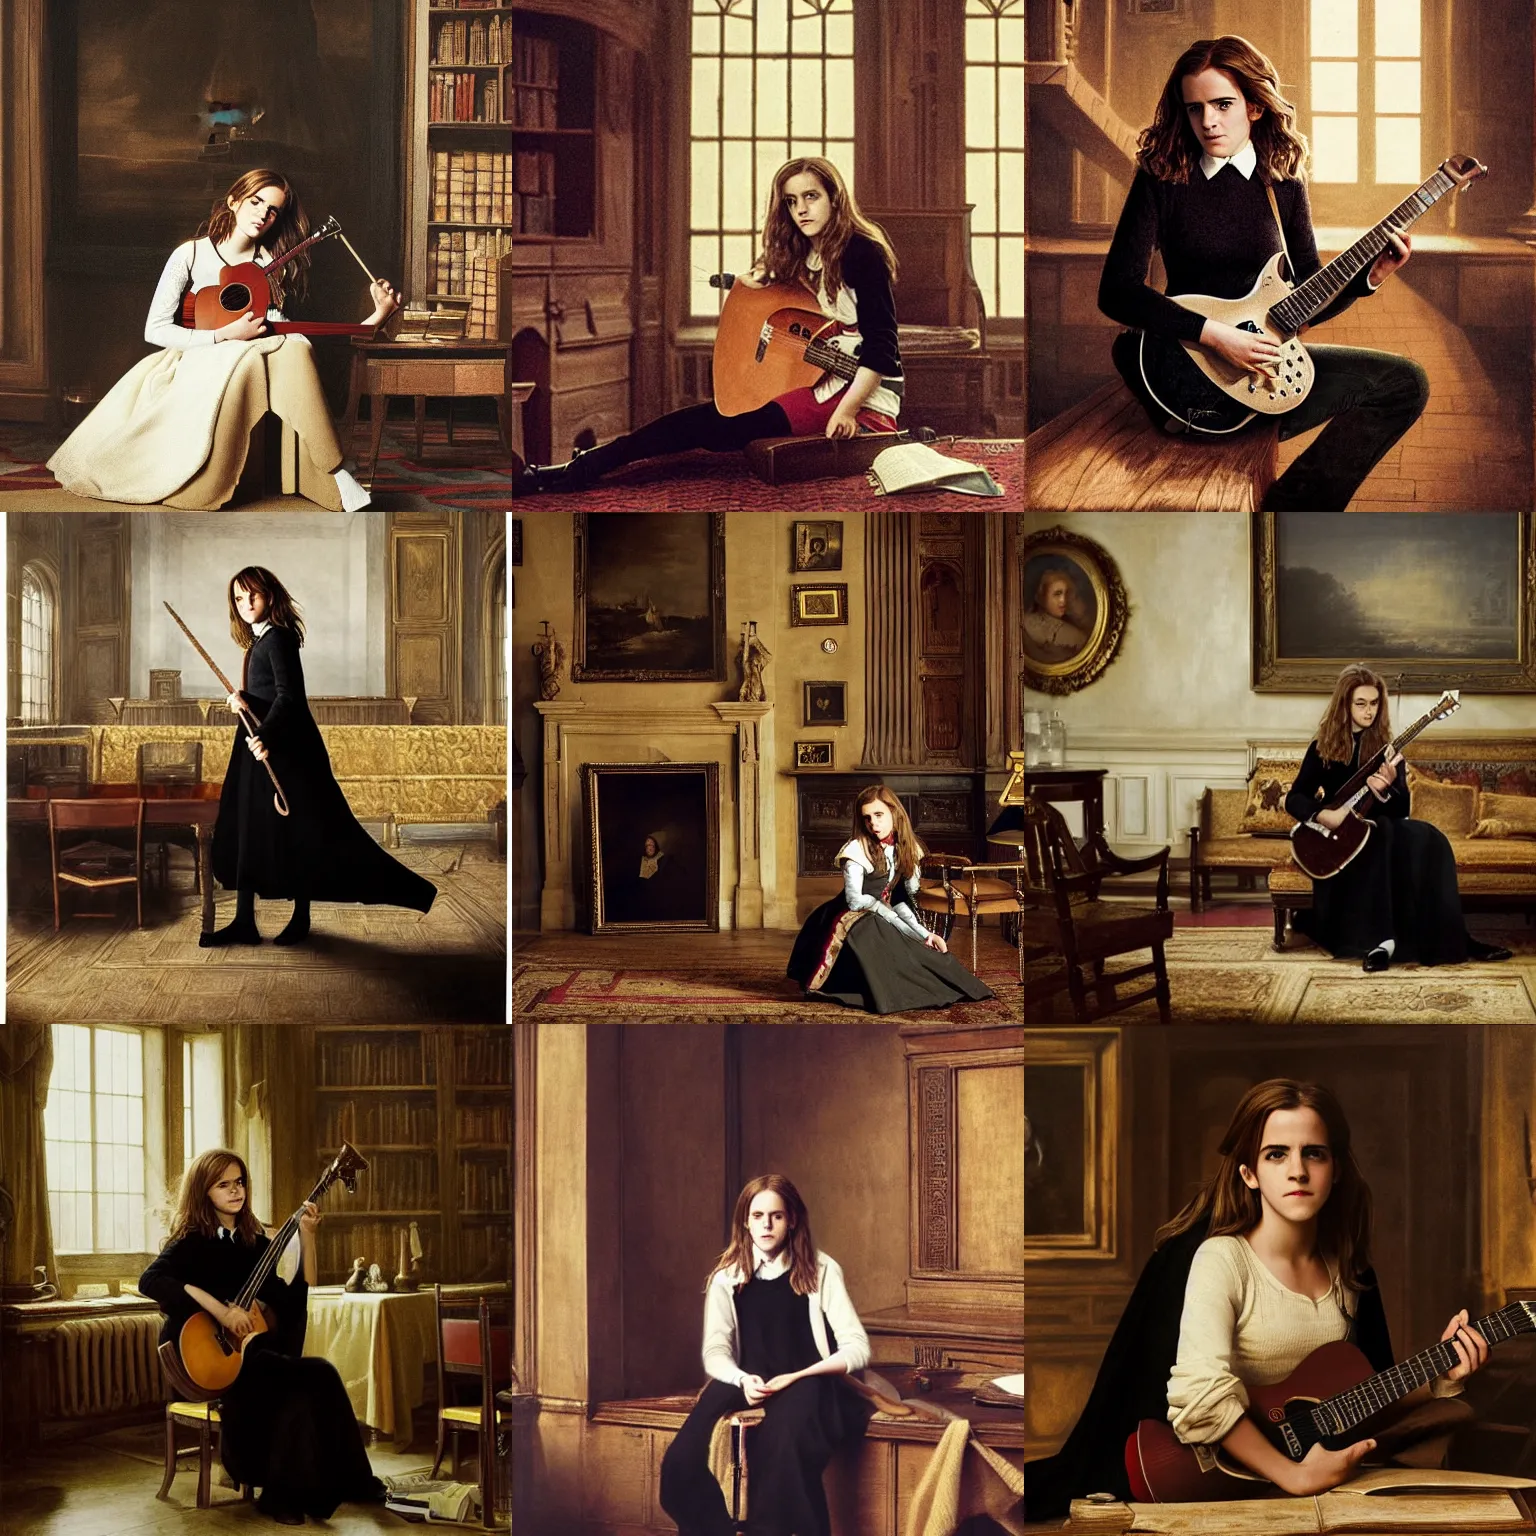 Prompt: Hermione Granger/Emma Watson wearing a black sweater, playing a guitar, in the Gryffindor common room, portrait photo by Canaletto